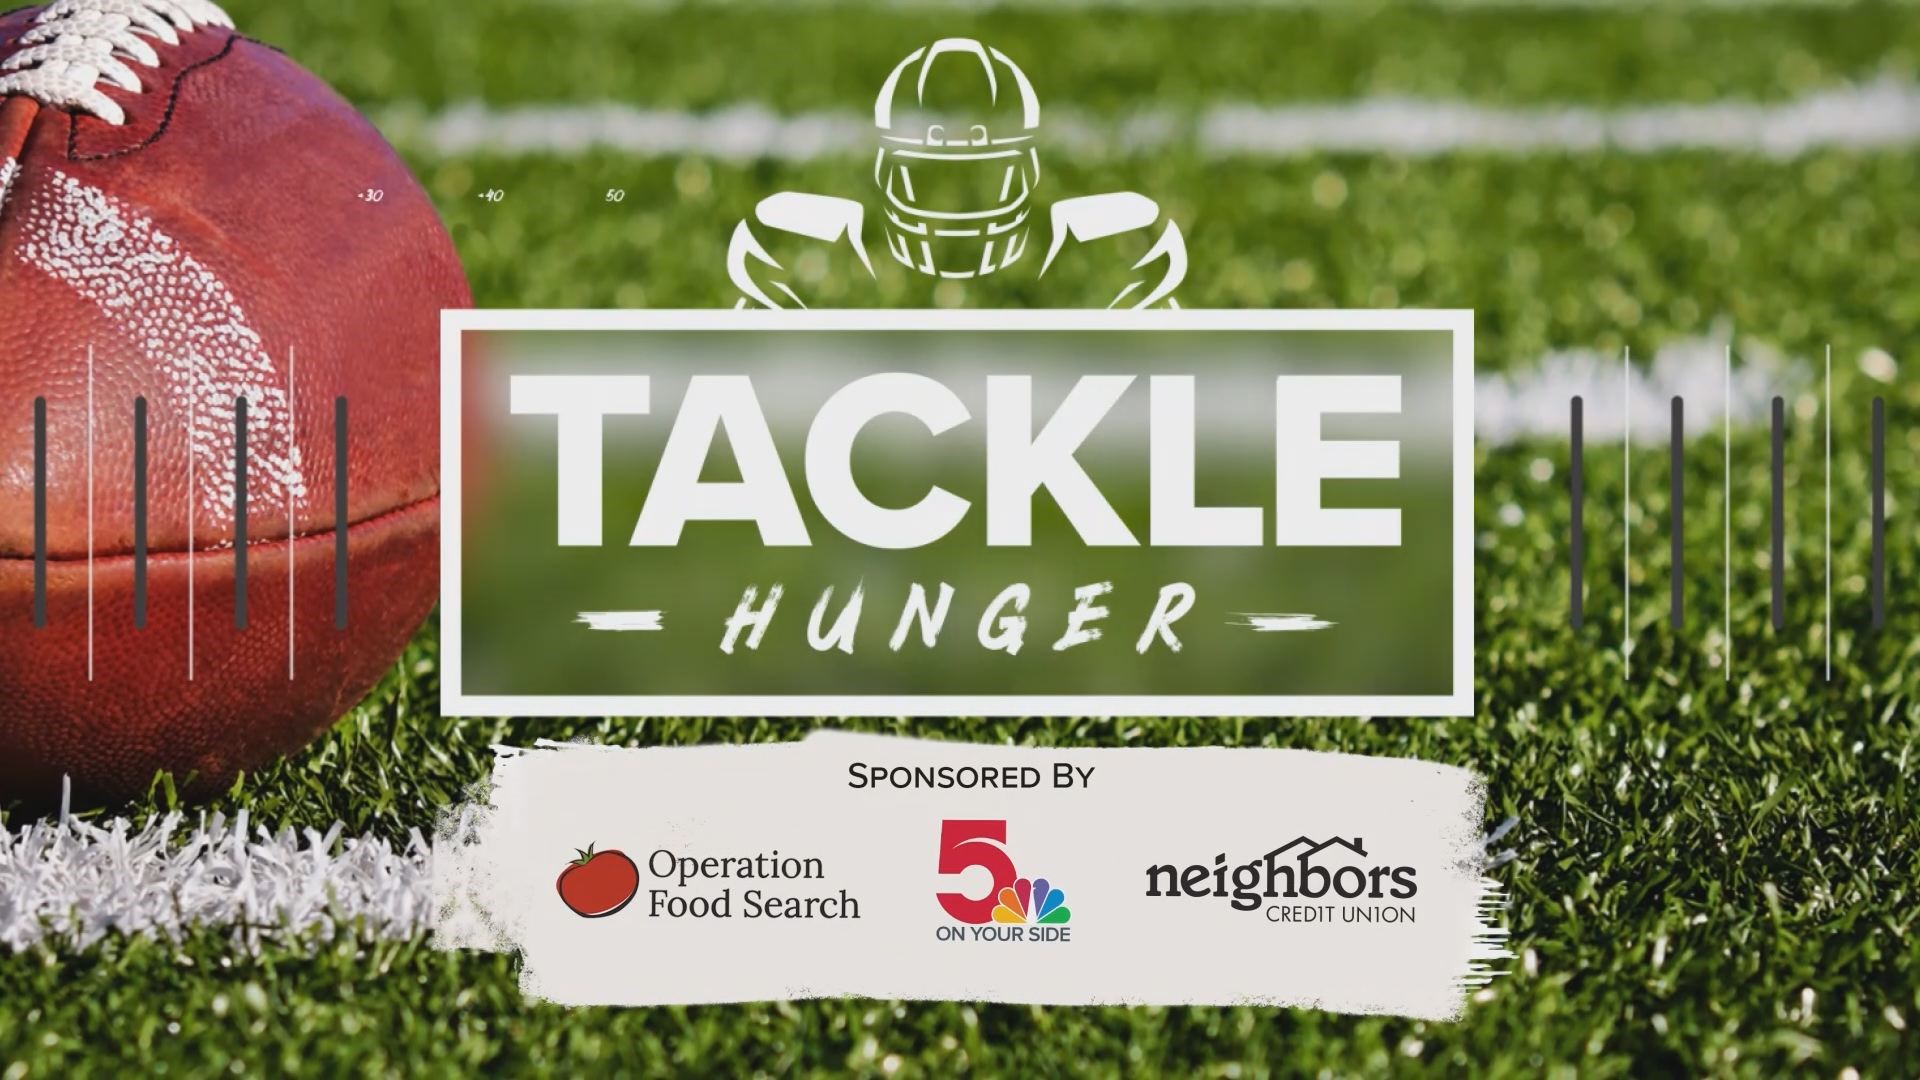 Marquette High School and LaFayette High School tackled hunger in week 1 of the high school football season. The teams raised $3,253.75.